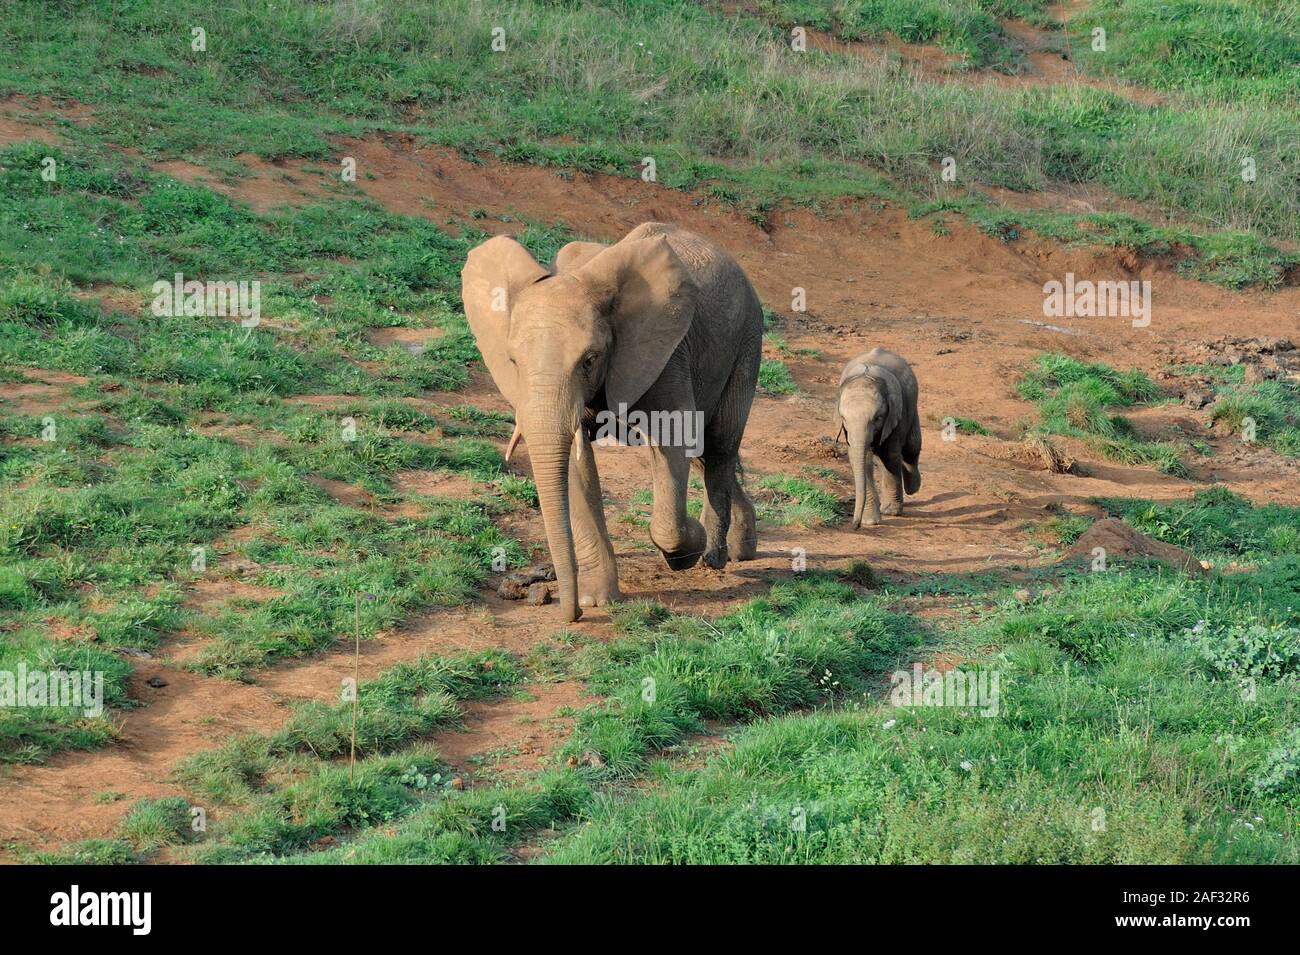 Adult elephant and calf walking trail in Cabarceno Nature Park, Cantabria, Spain. Stock Photo